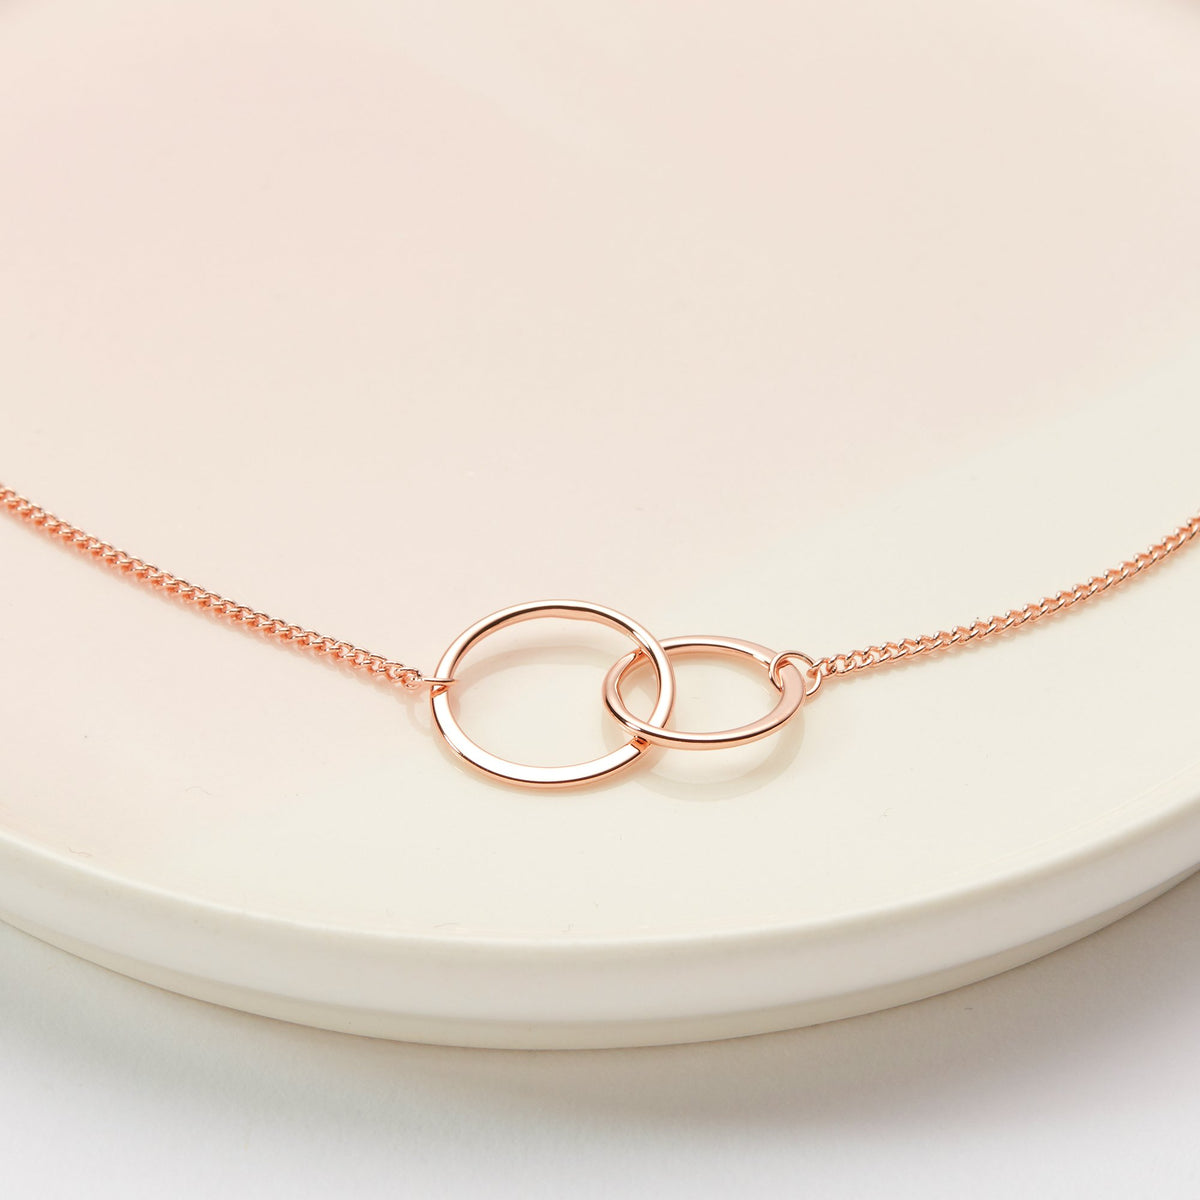 Unbiological Sister Double Circles Necklace